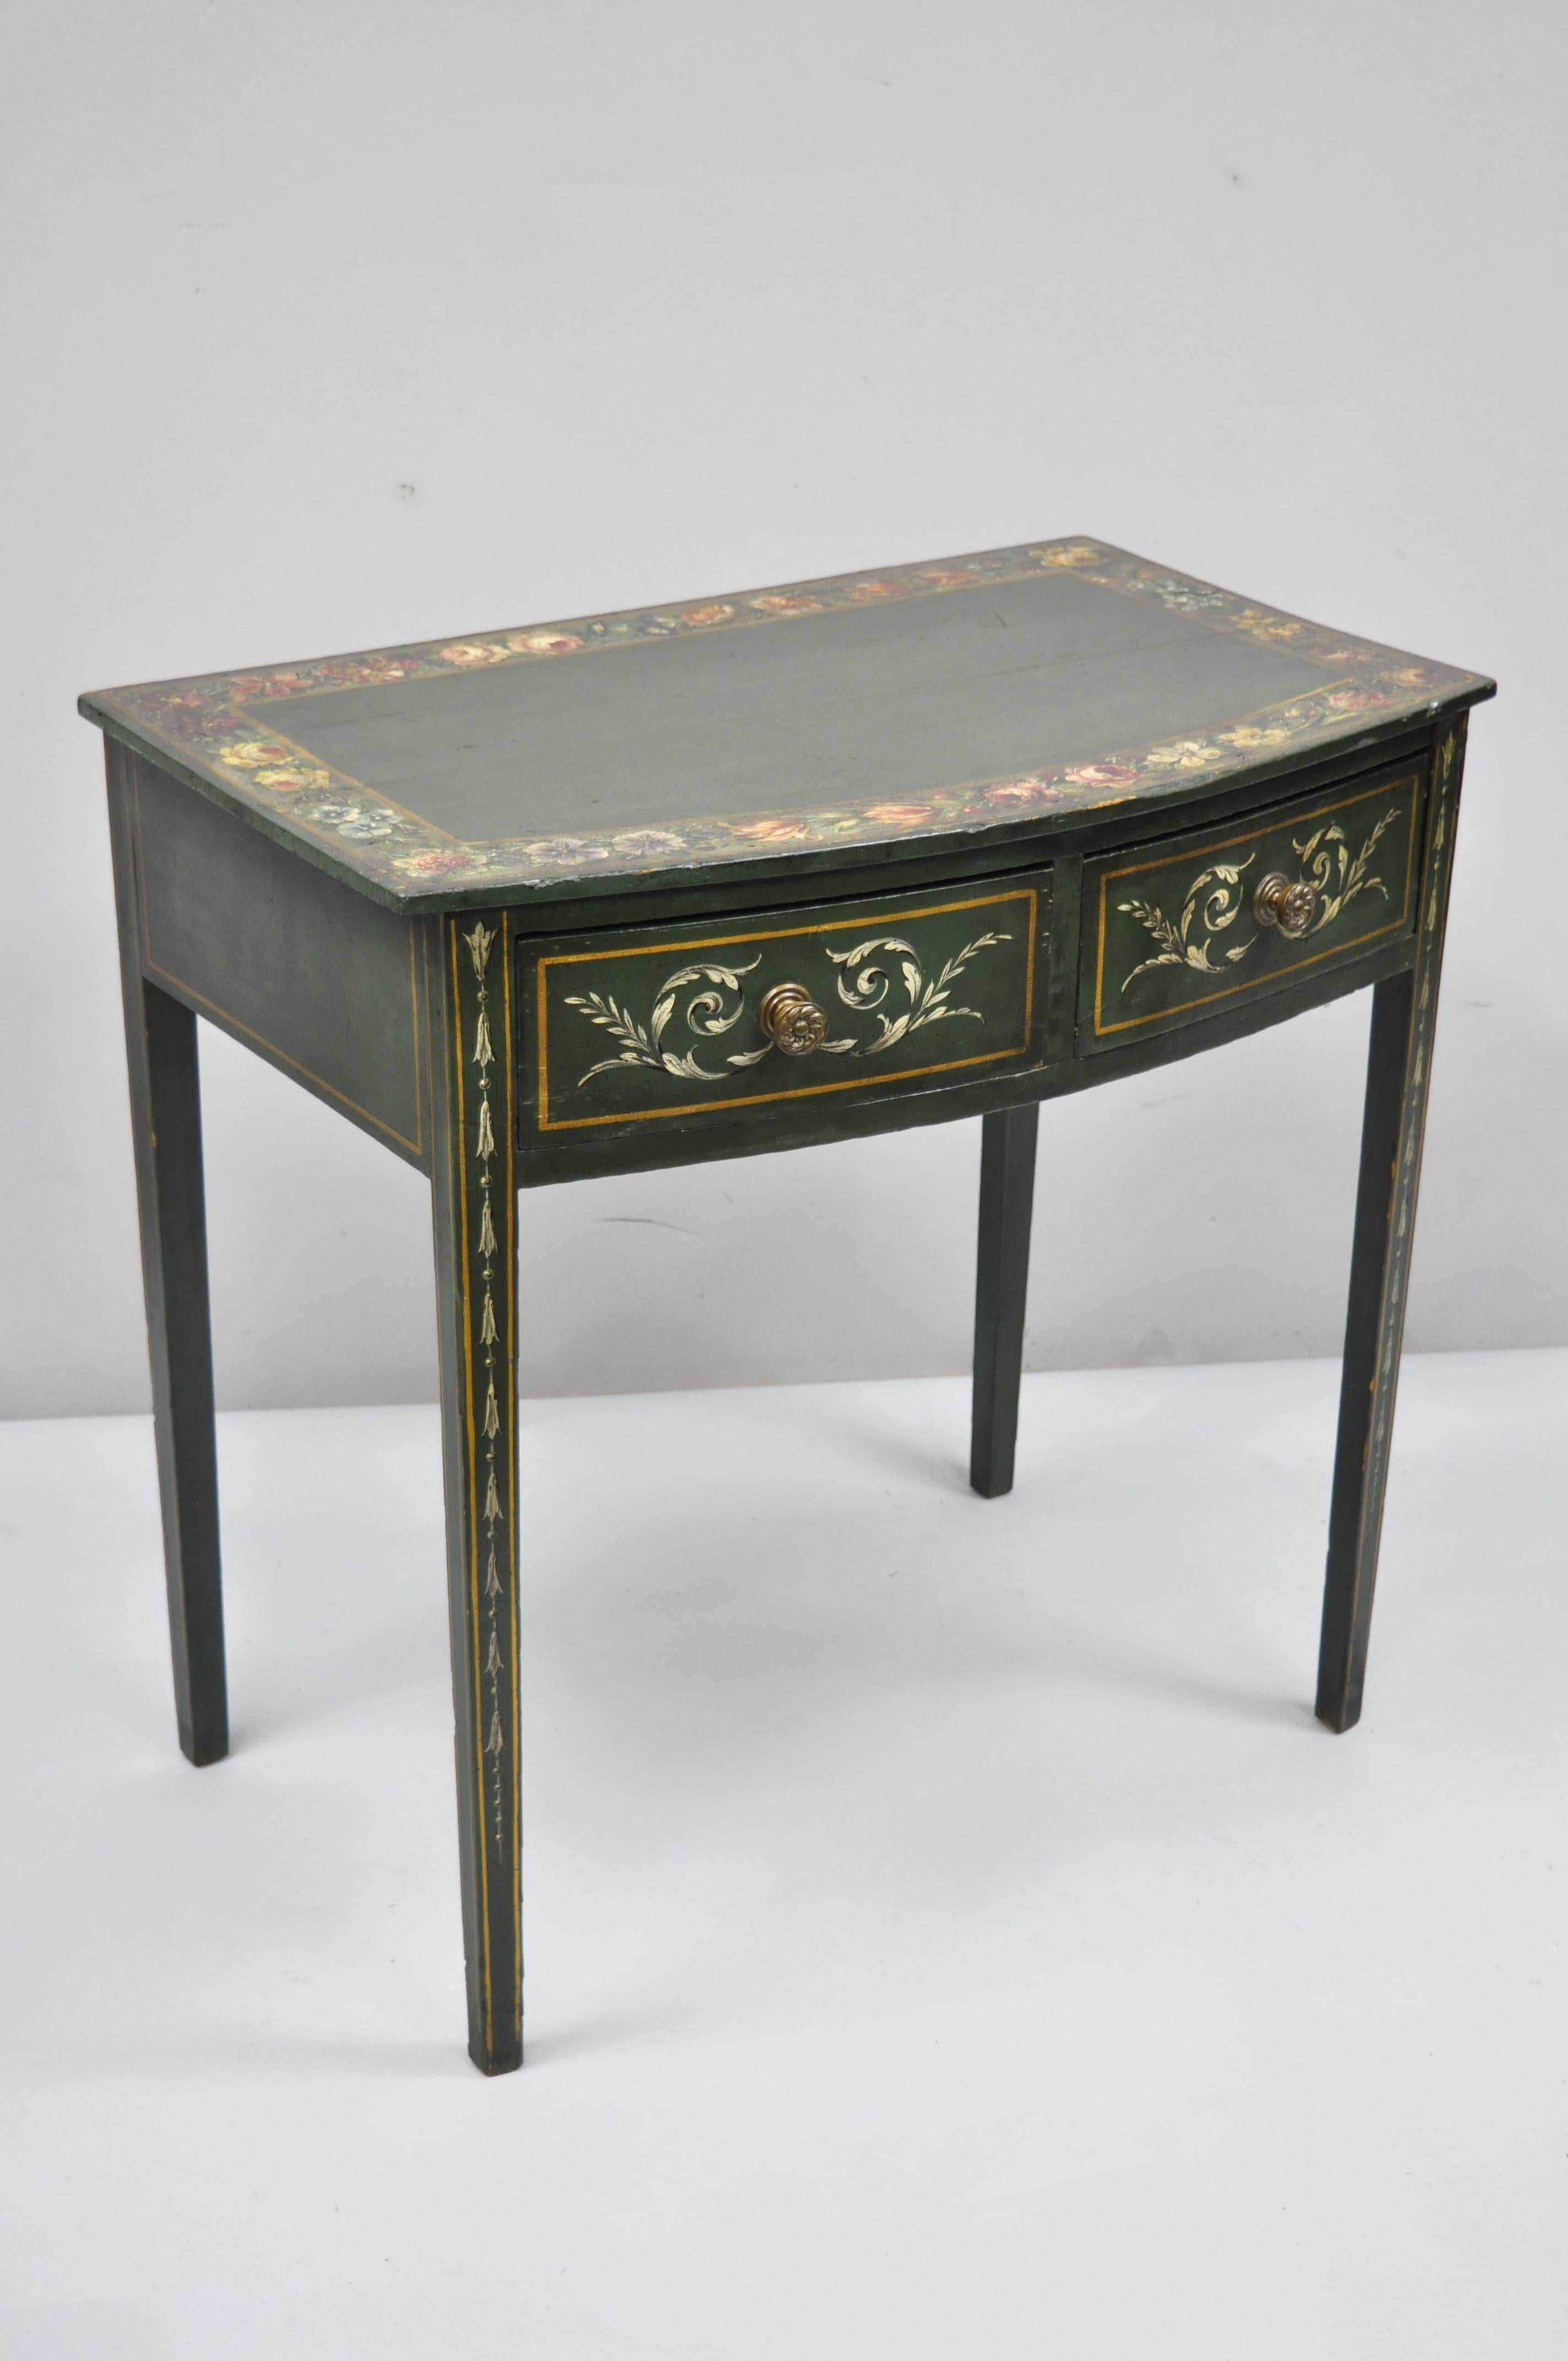 19th century antique green flower painted Victorian 2-drawer demilune hall console table. Item features hand painted floral scrollwork, bellflowers, colorful floral painted top, green painted finish, shaped demilune top, solid wood construction, 2